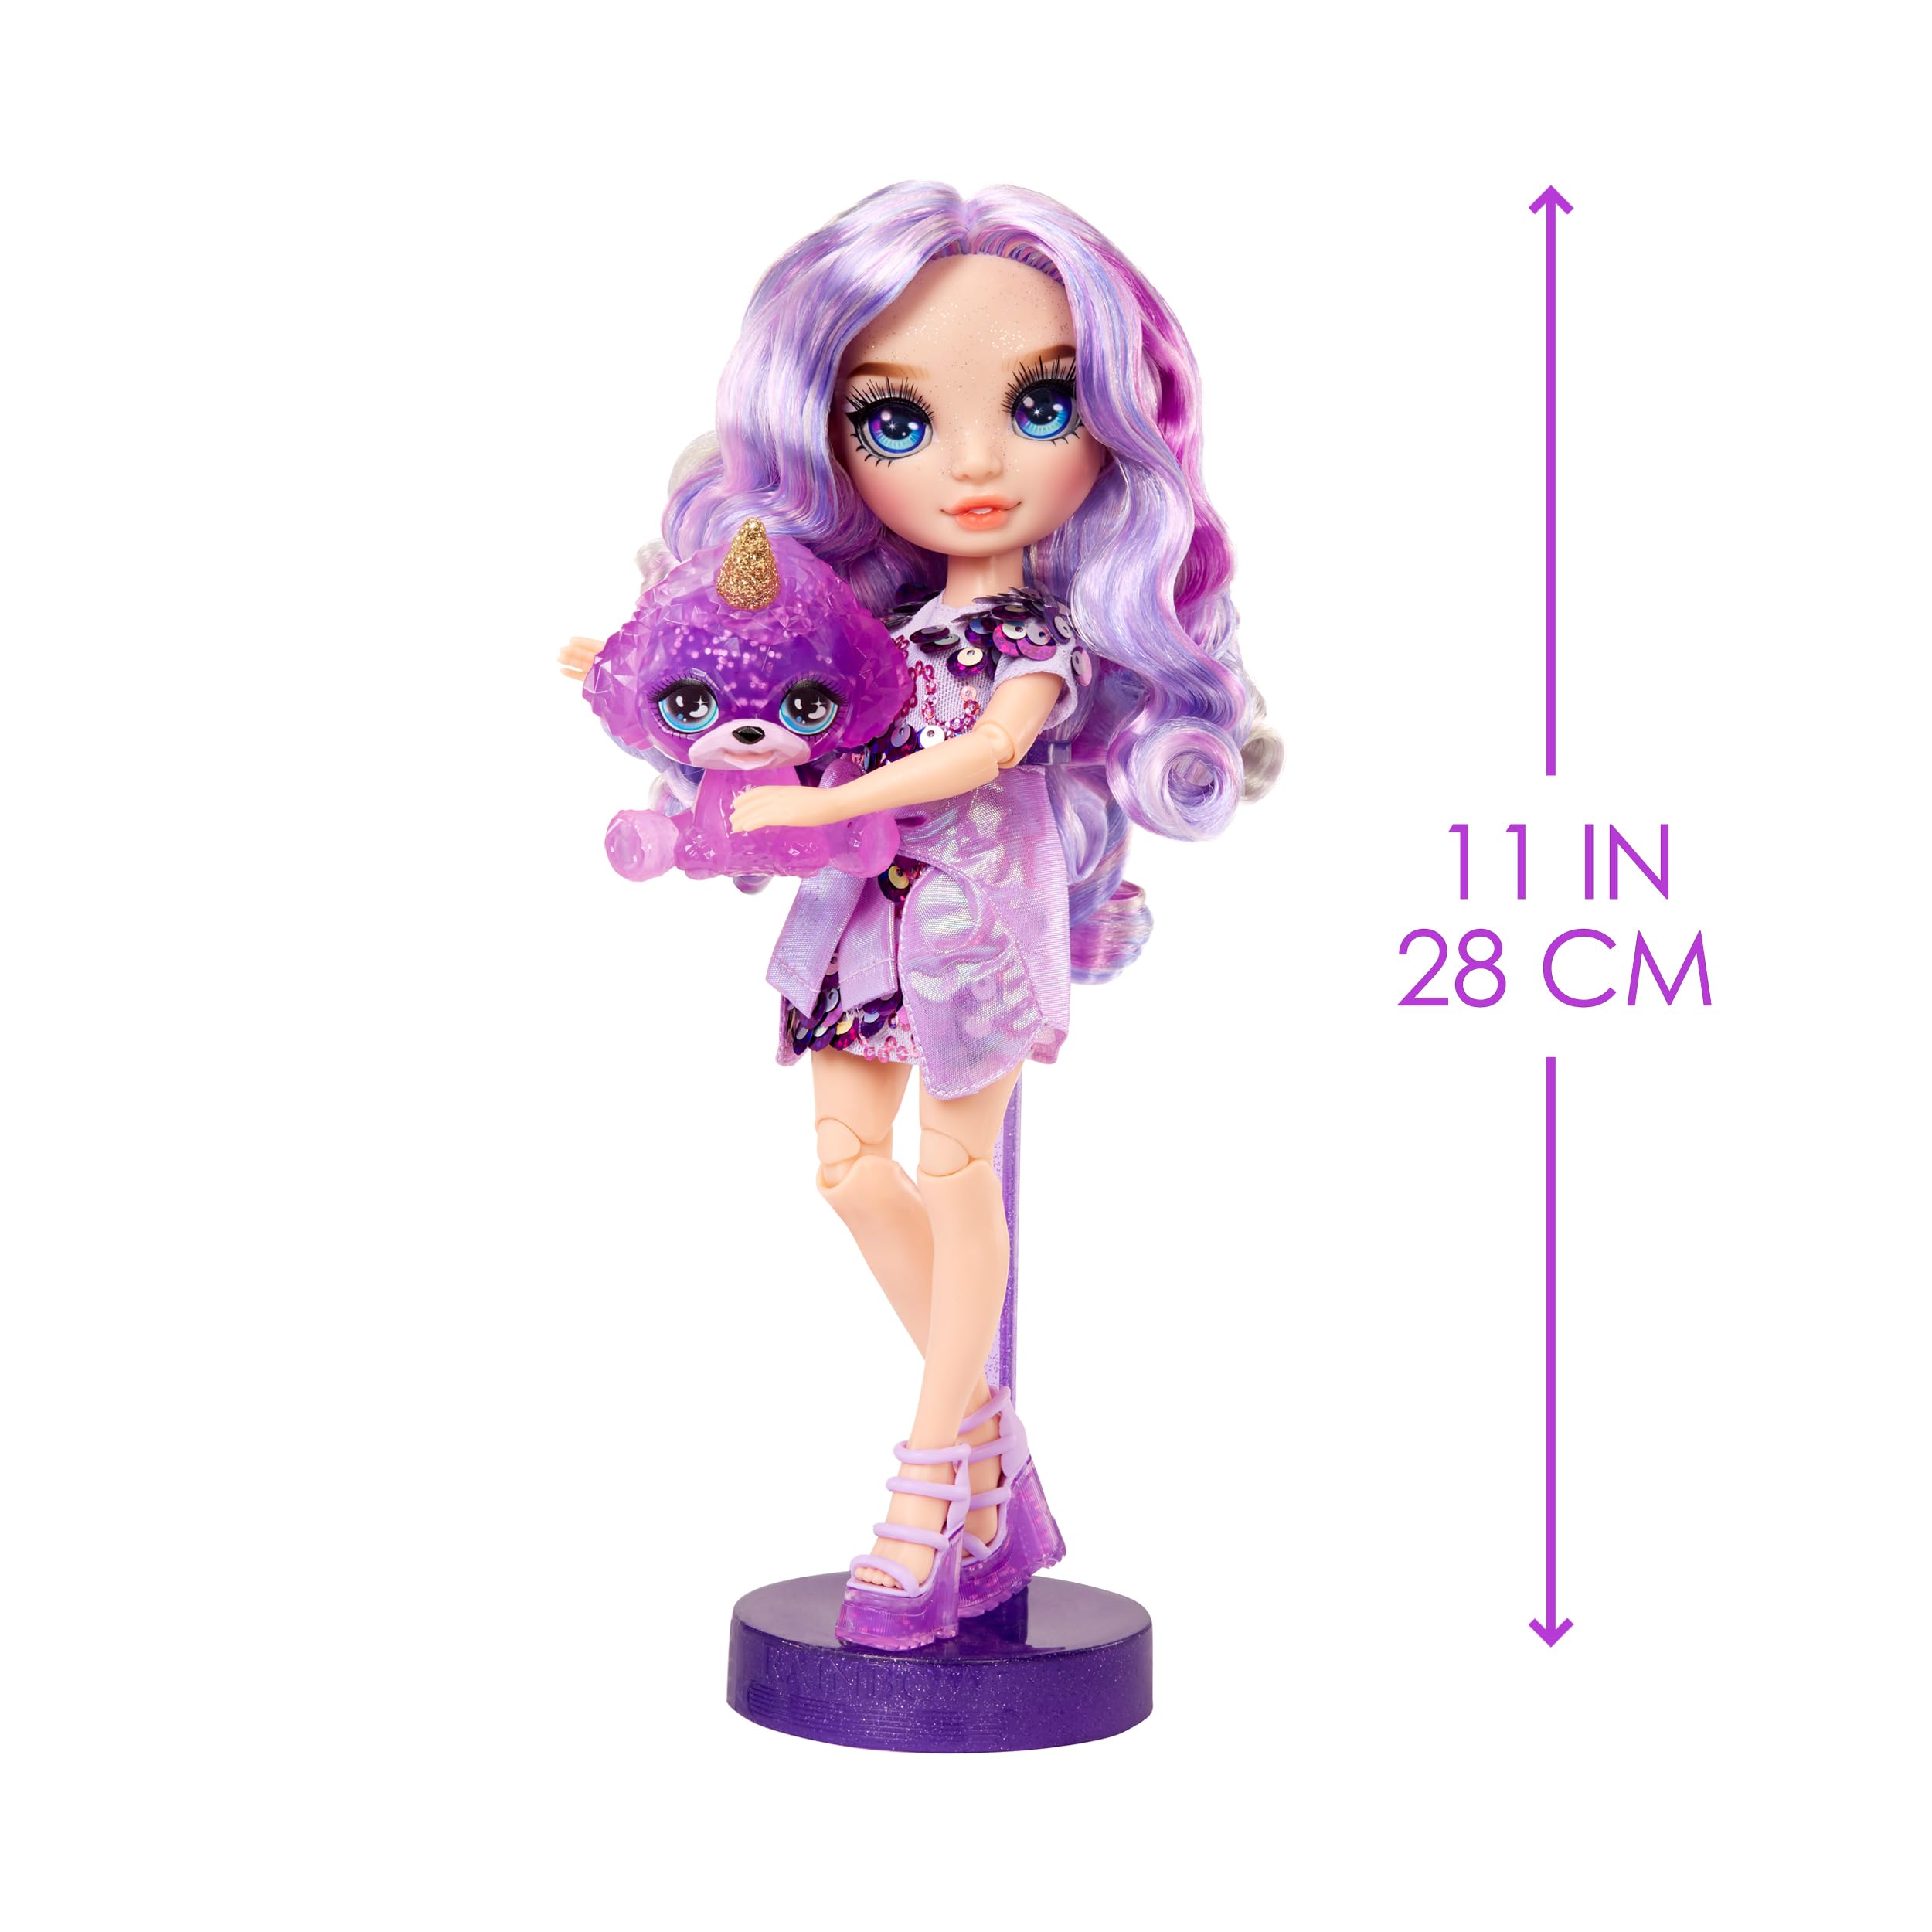 Rainbow High Violet (Purple) with Slime Kit & Pet - Purple 11” Shimmer Doll with DIY Sparkle Slime, Magical Yeti Pet and Fashion Accessories, Kids Gift 4-12 Years